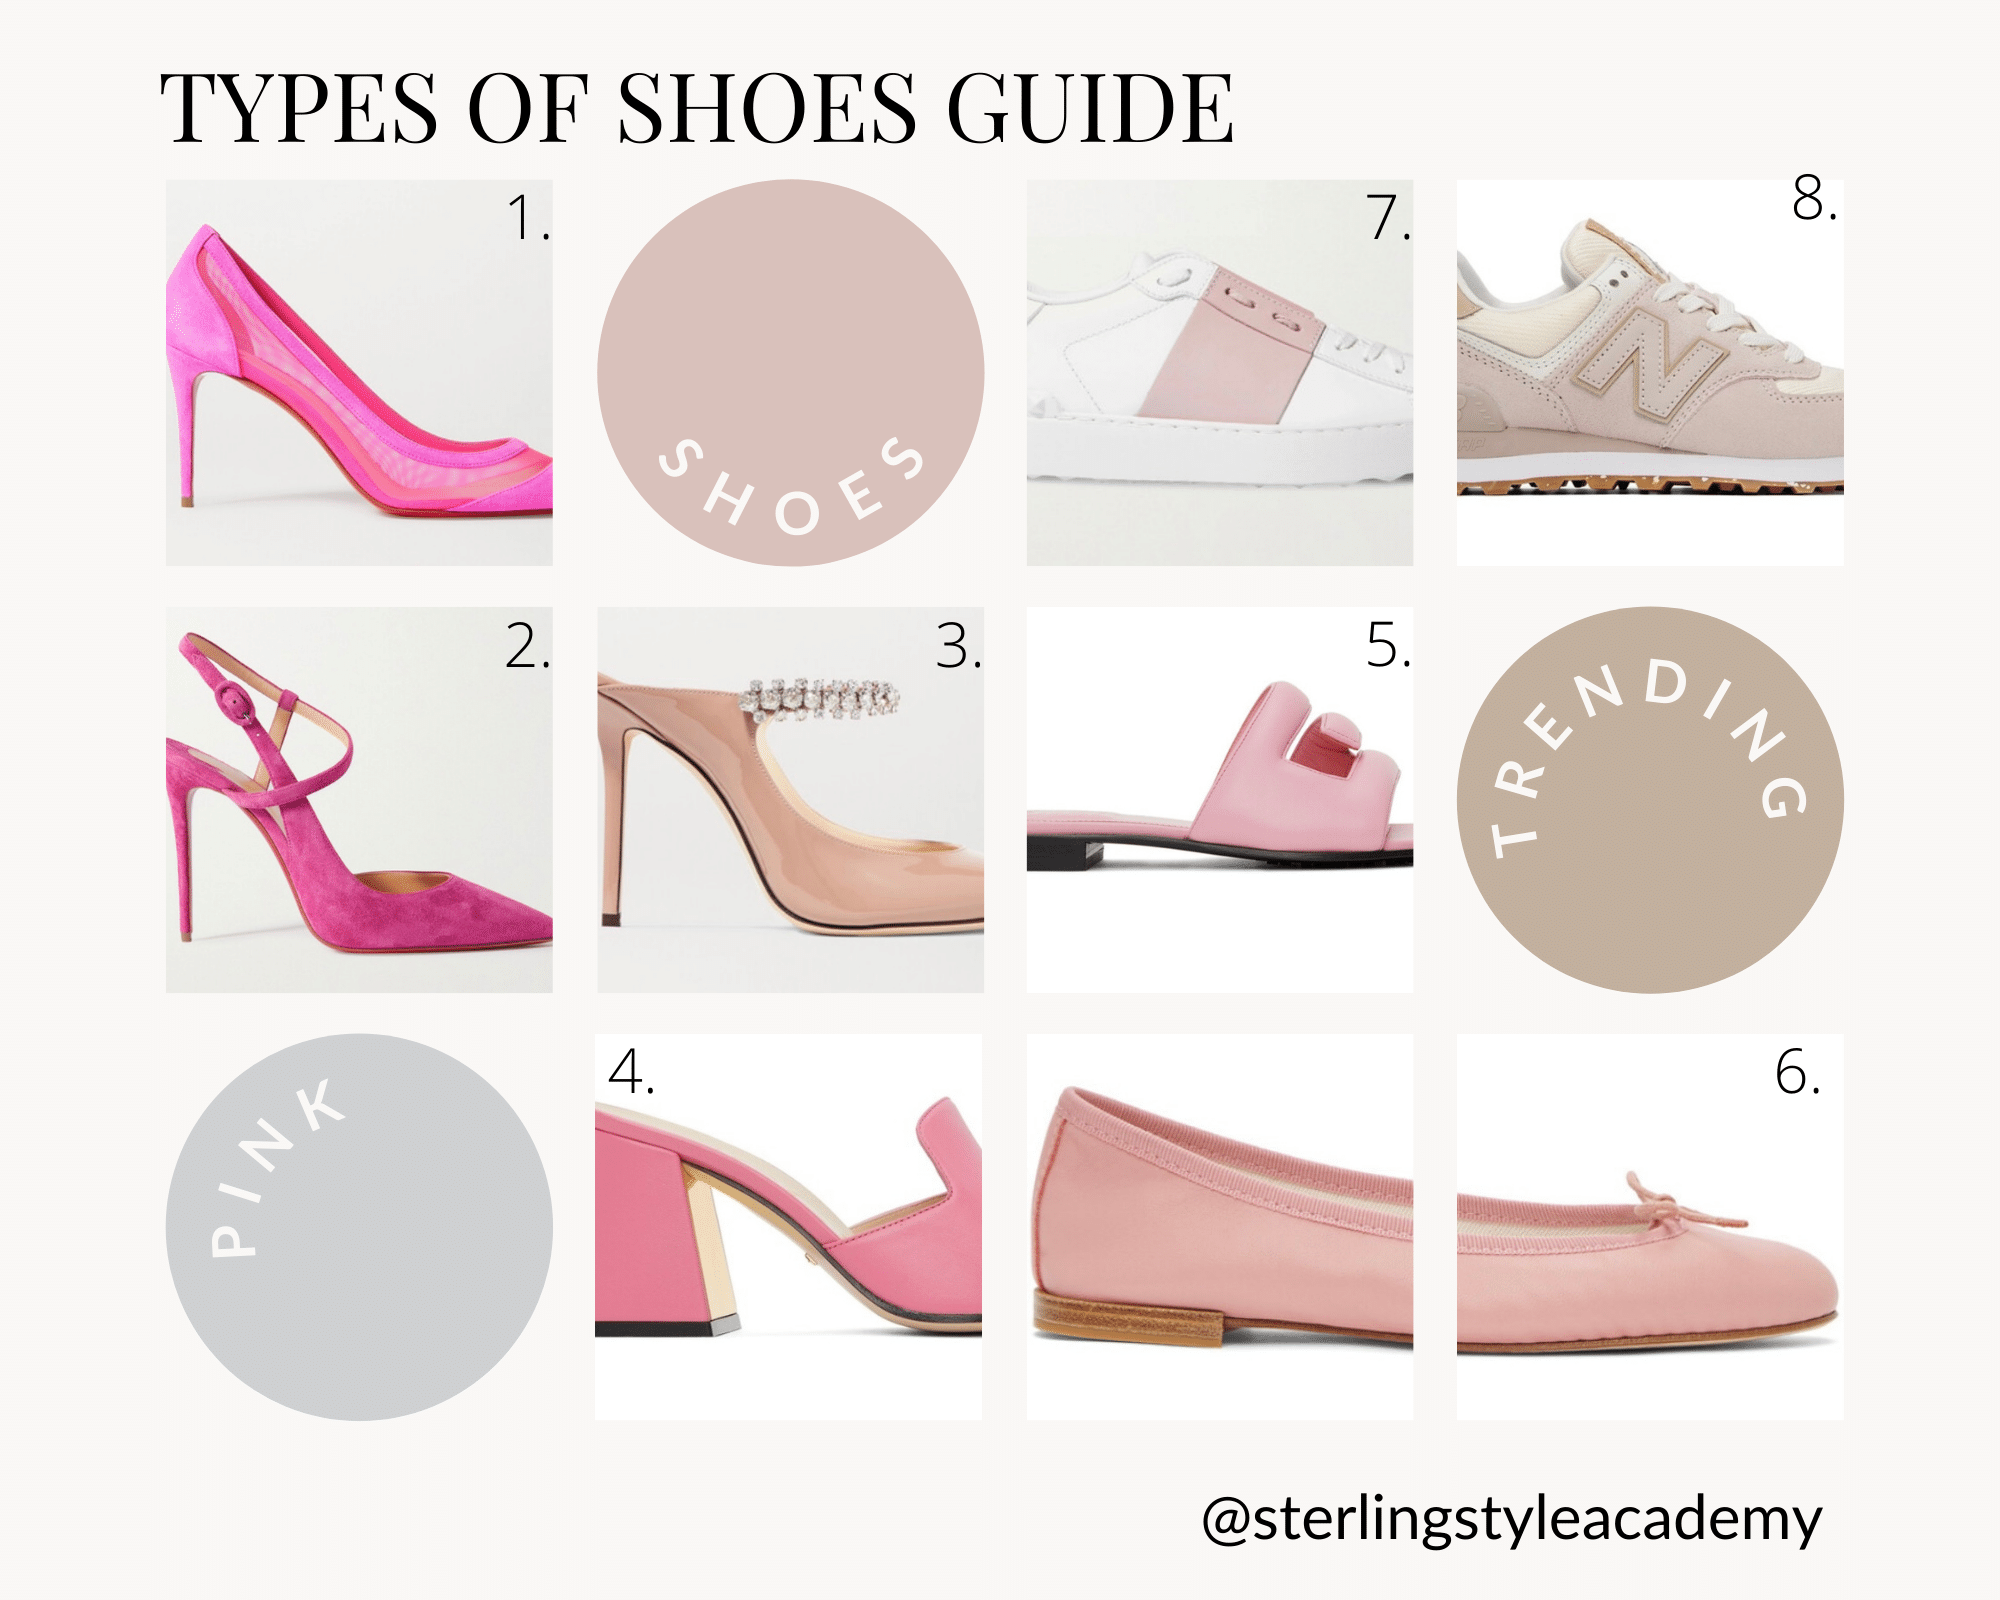 8 Foundational Types of Shoes Guide for Ladies - Image Consultant